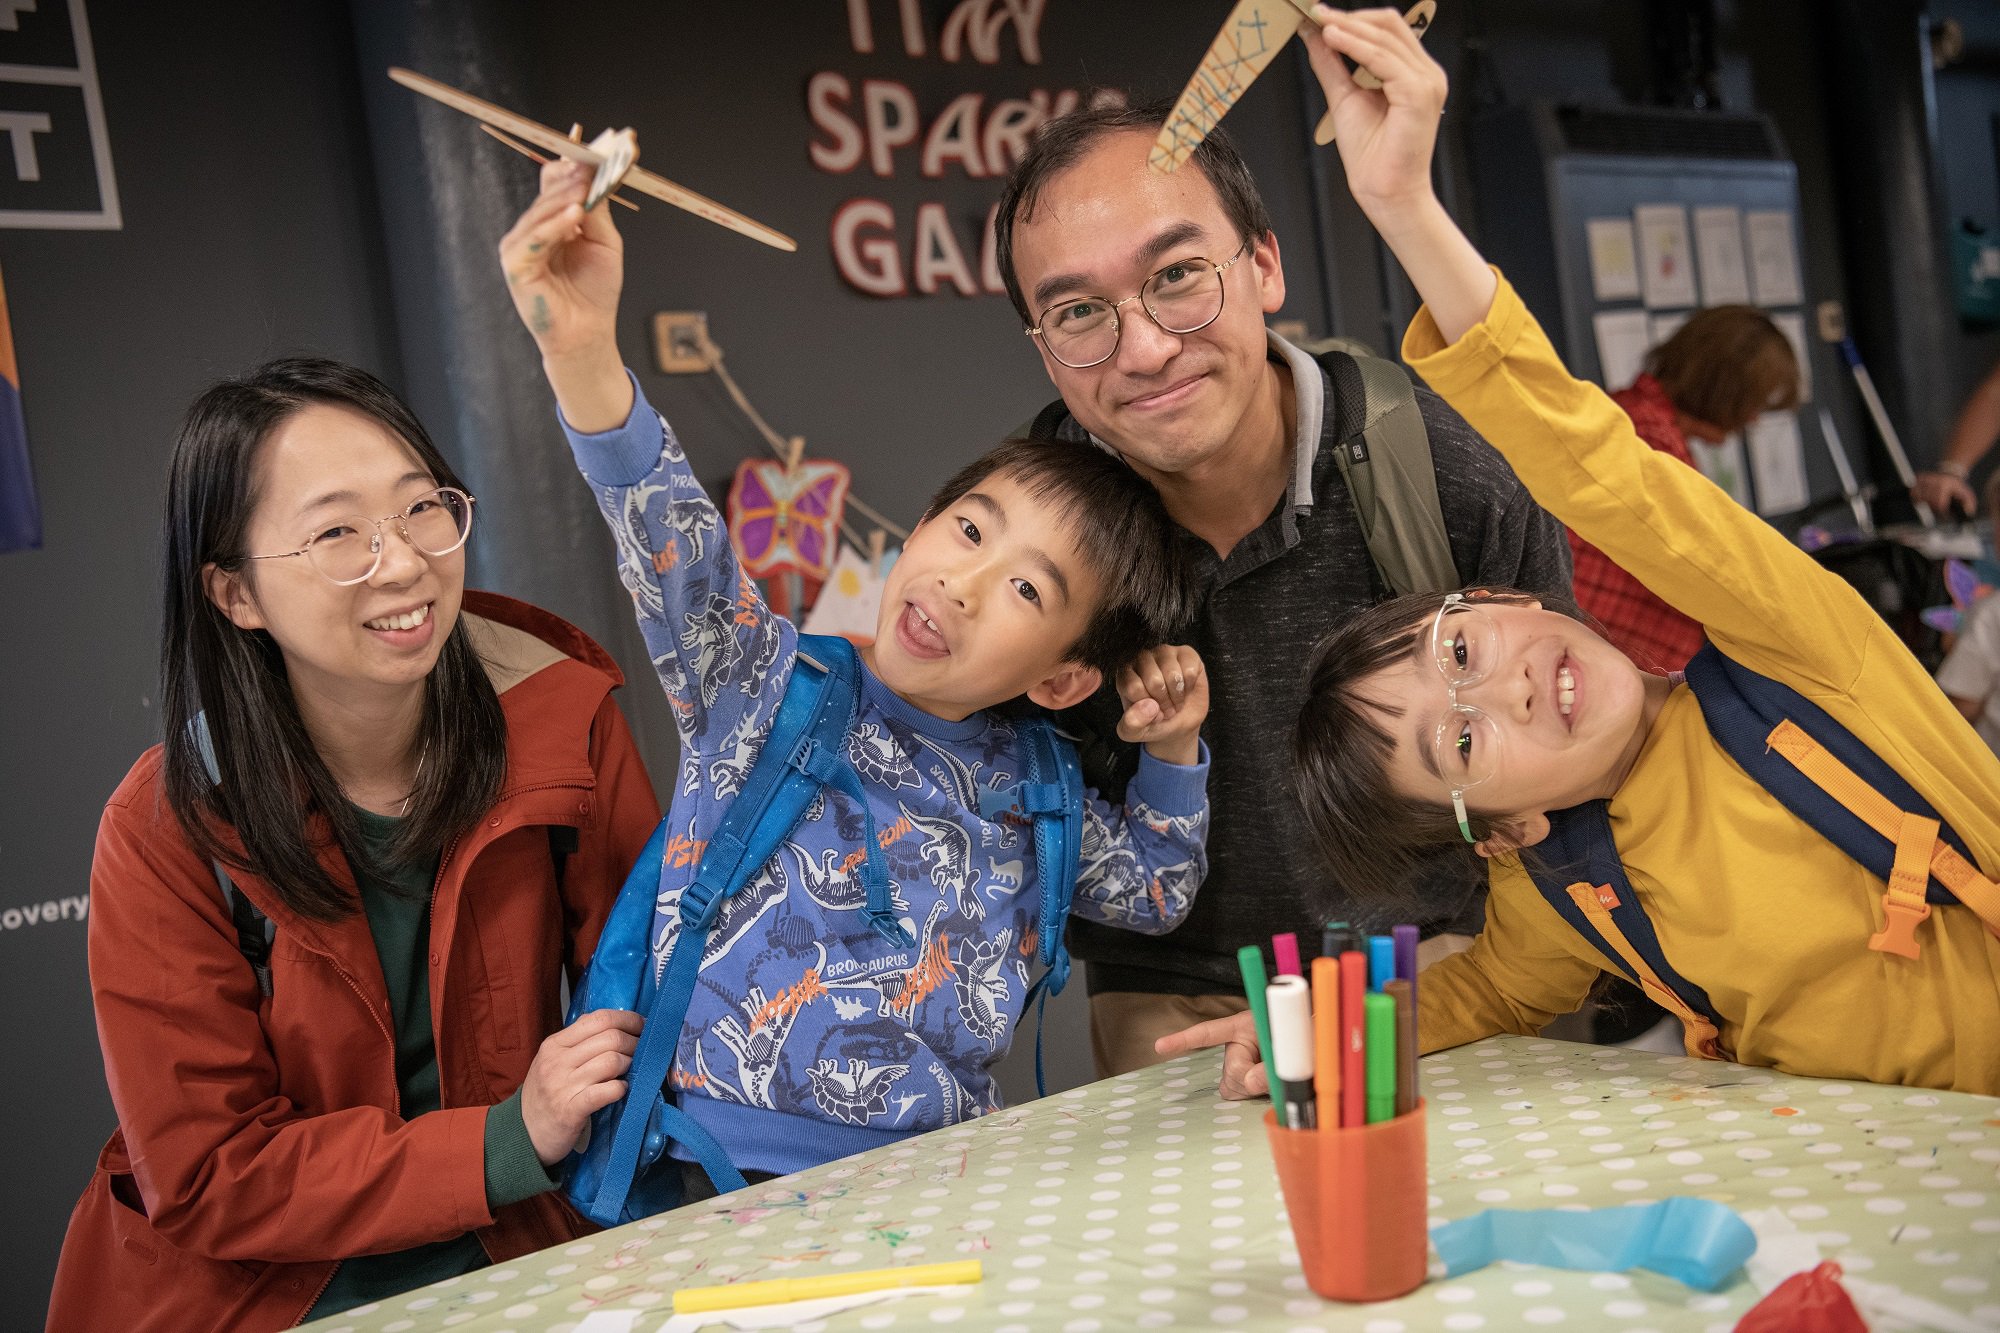 A family of four enjoying a craft activity in a museum.